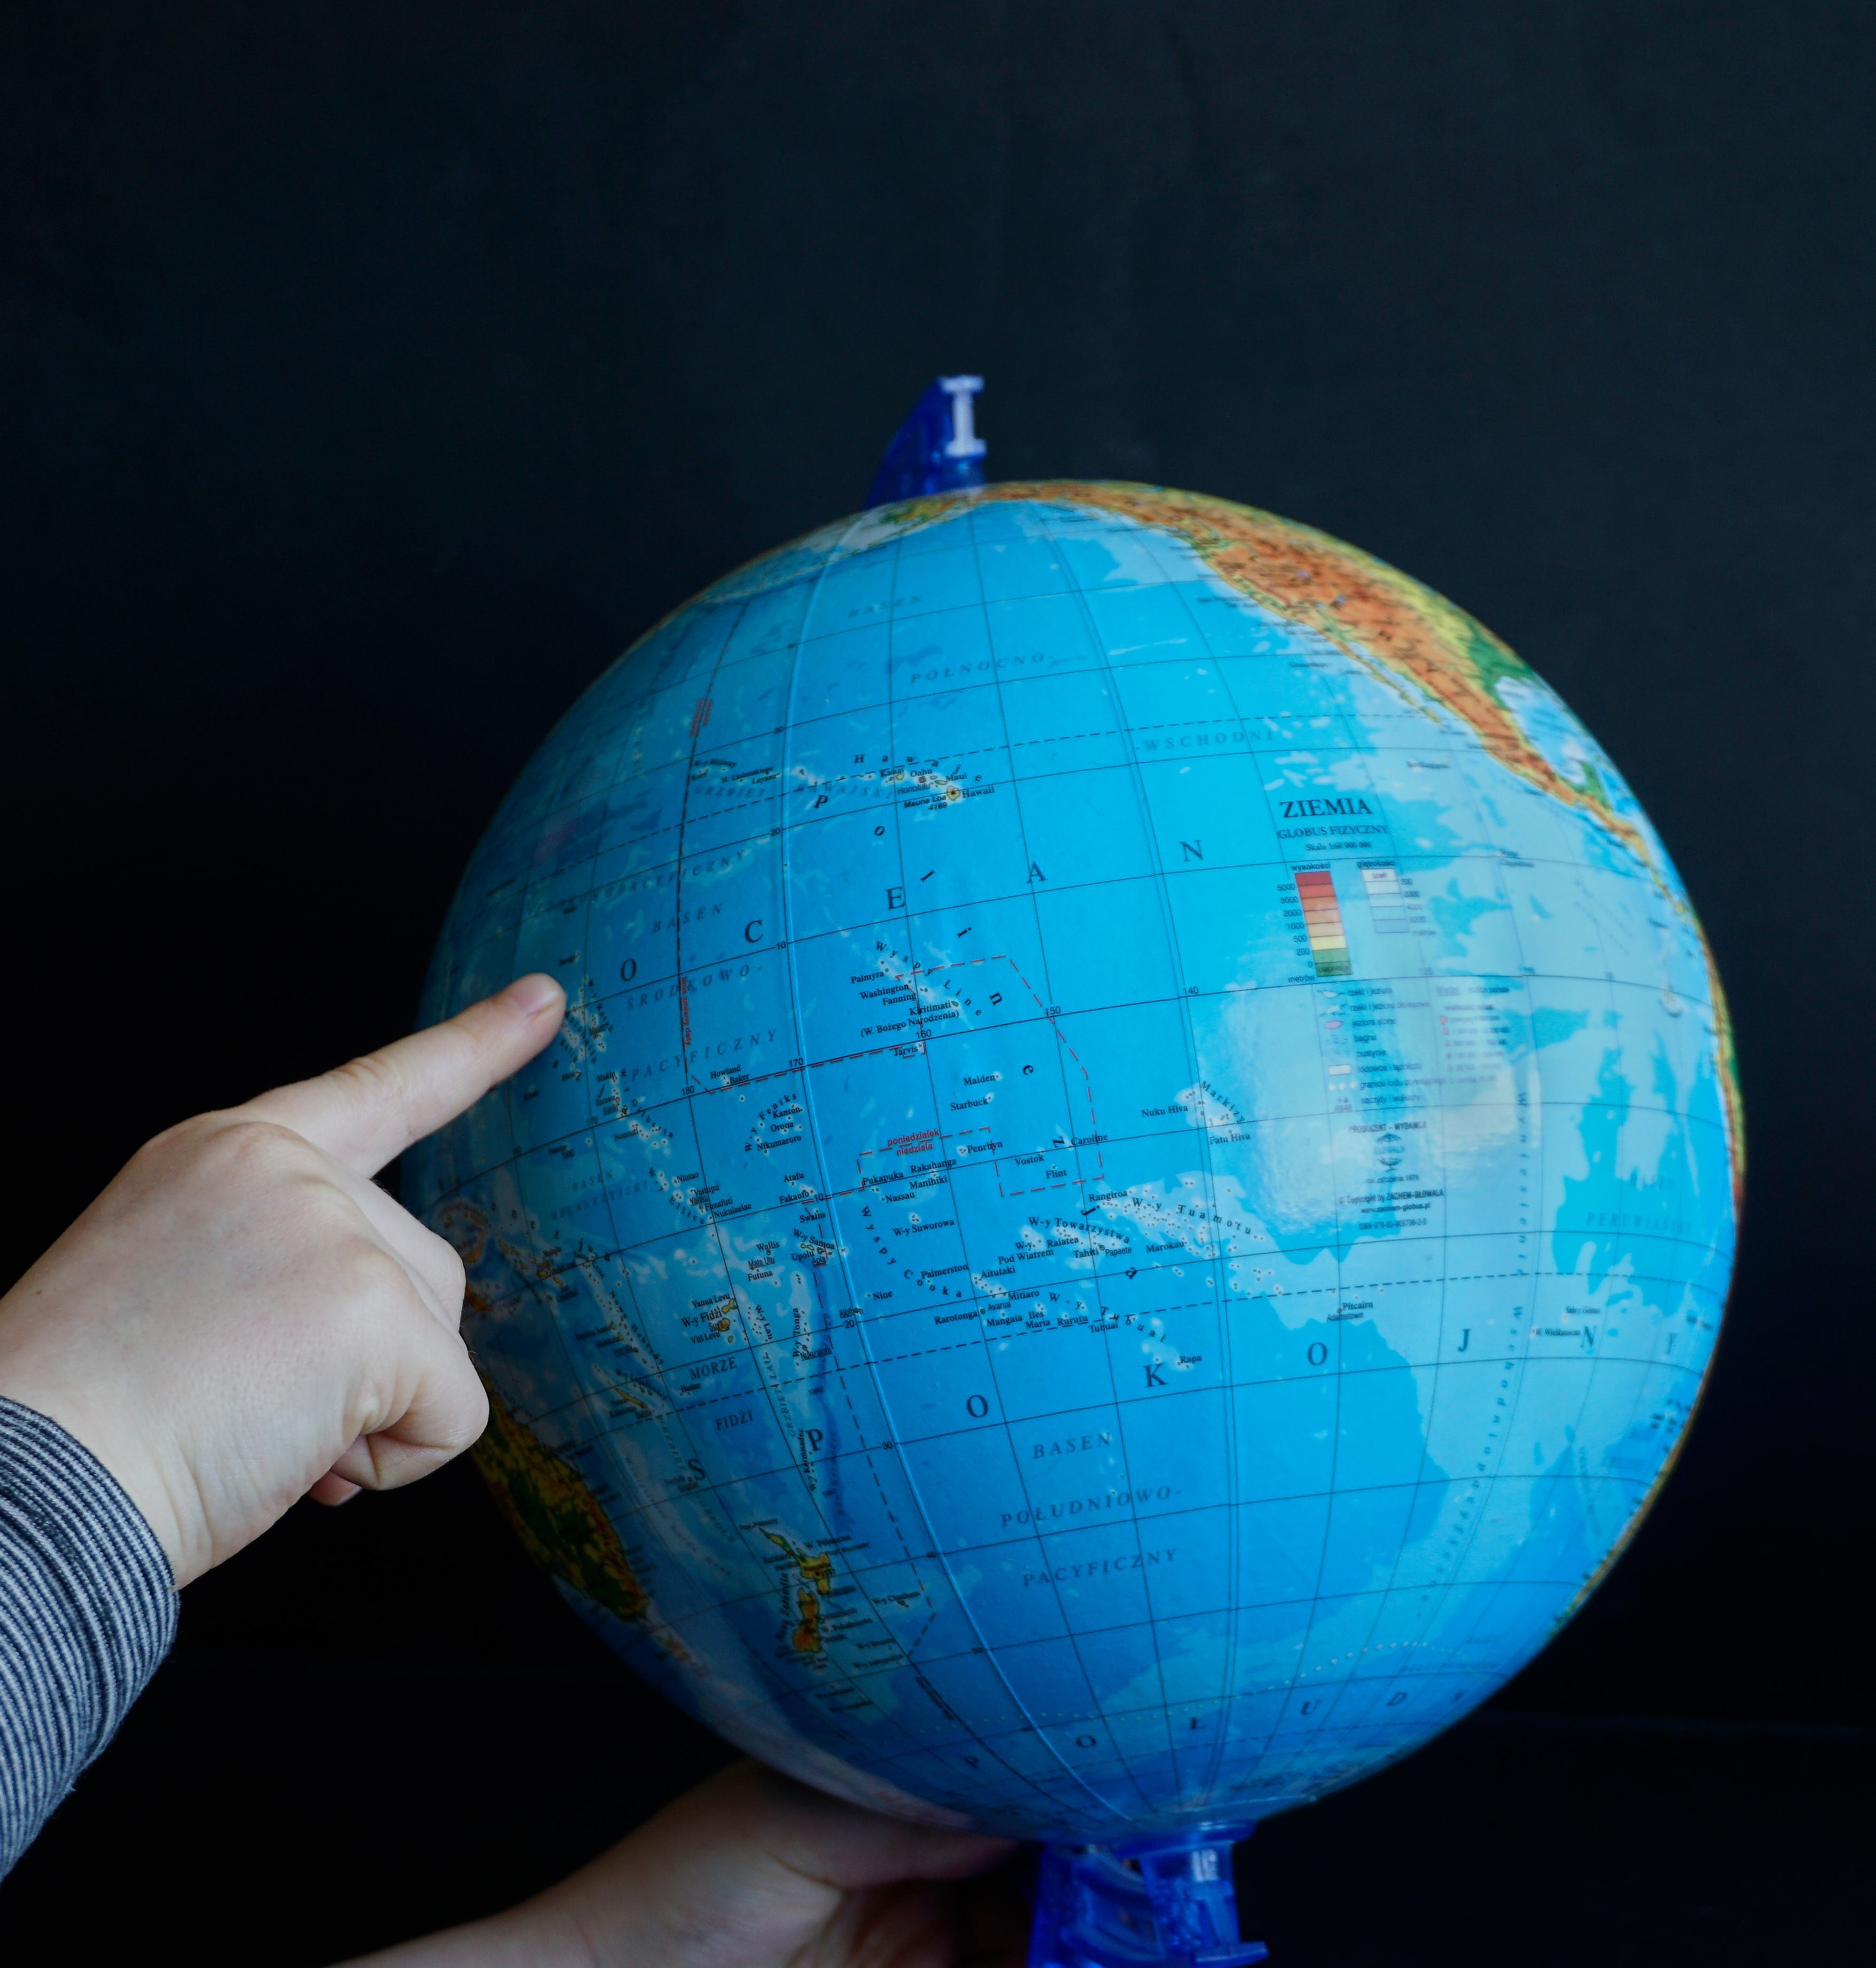 Finger, Map, Globus, Child, Earth, planet earth, planet - space